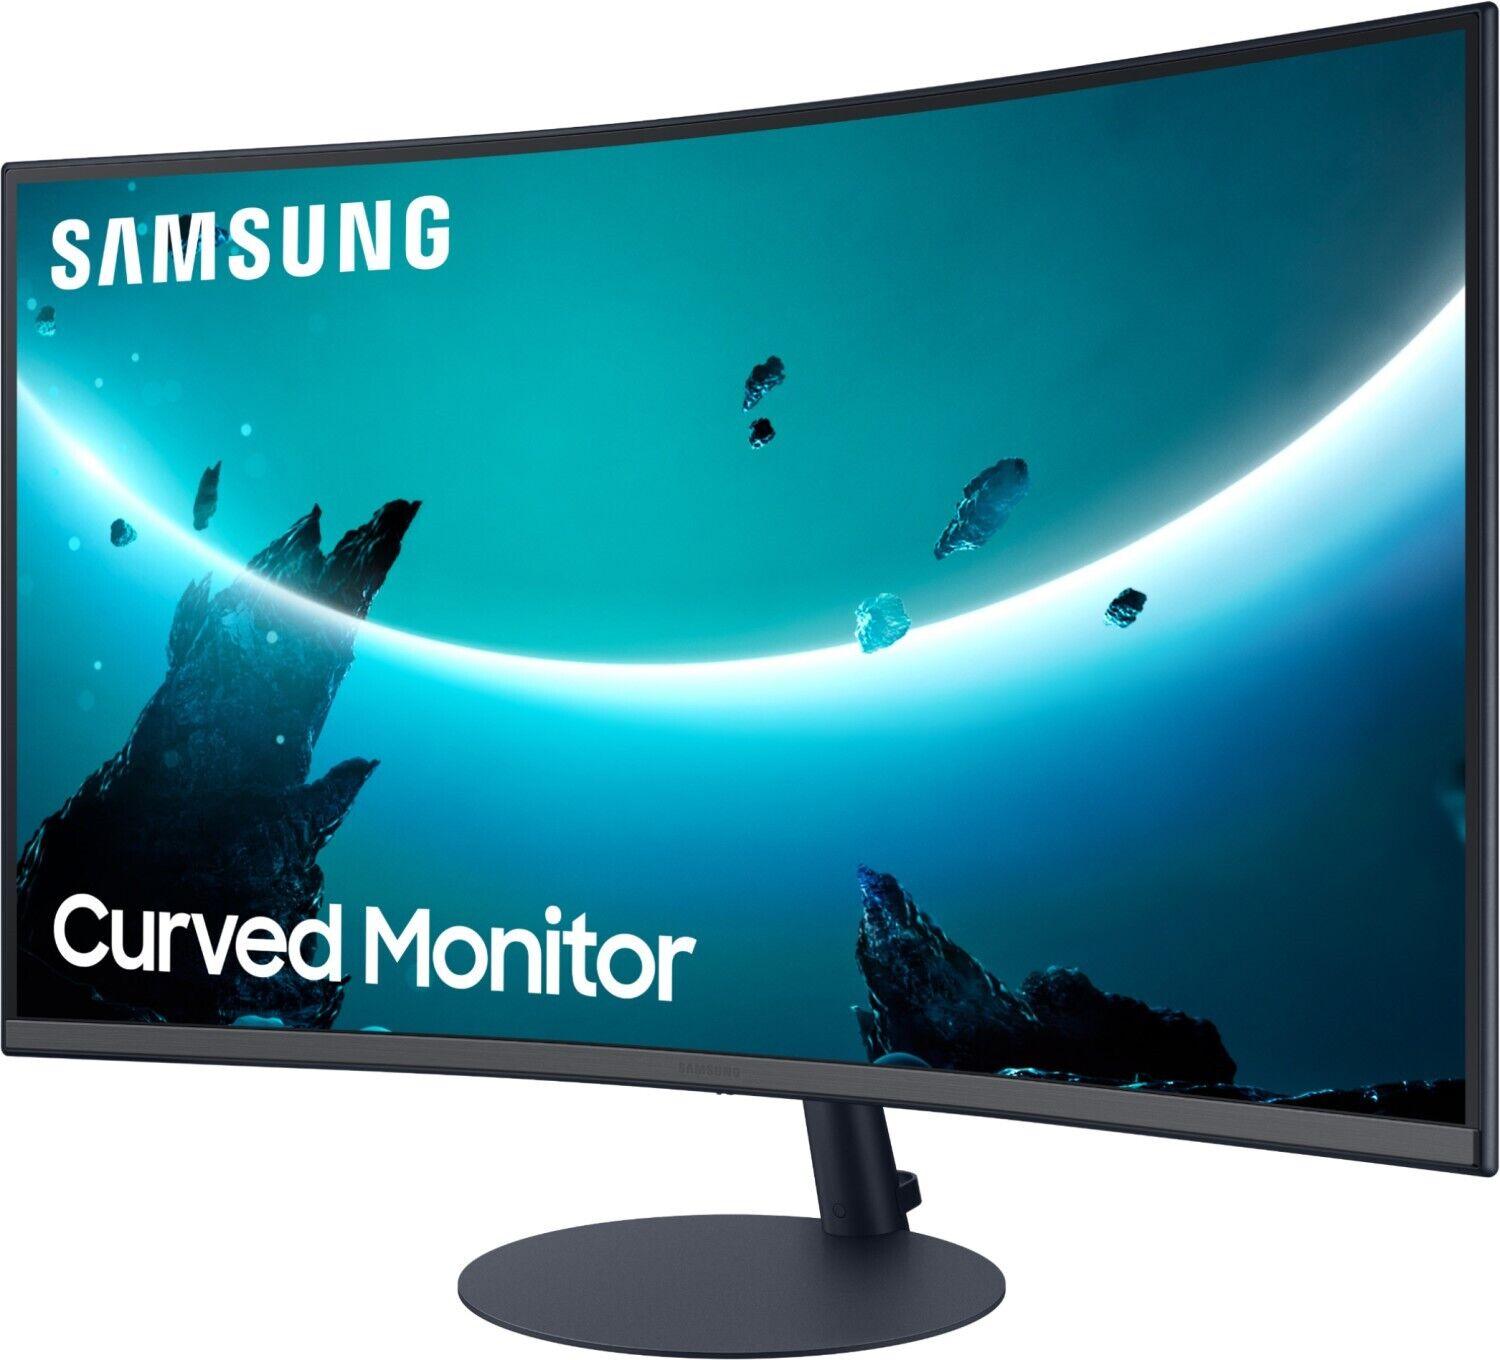 Samsung T55 Curved Monitor, 32 Inch, 1000R, 75hz, 4ms, 1080p, U, NO STAND - Smart Clear Vision